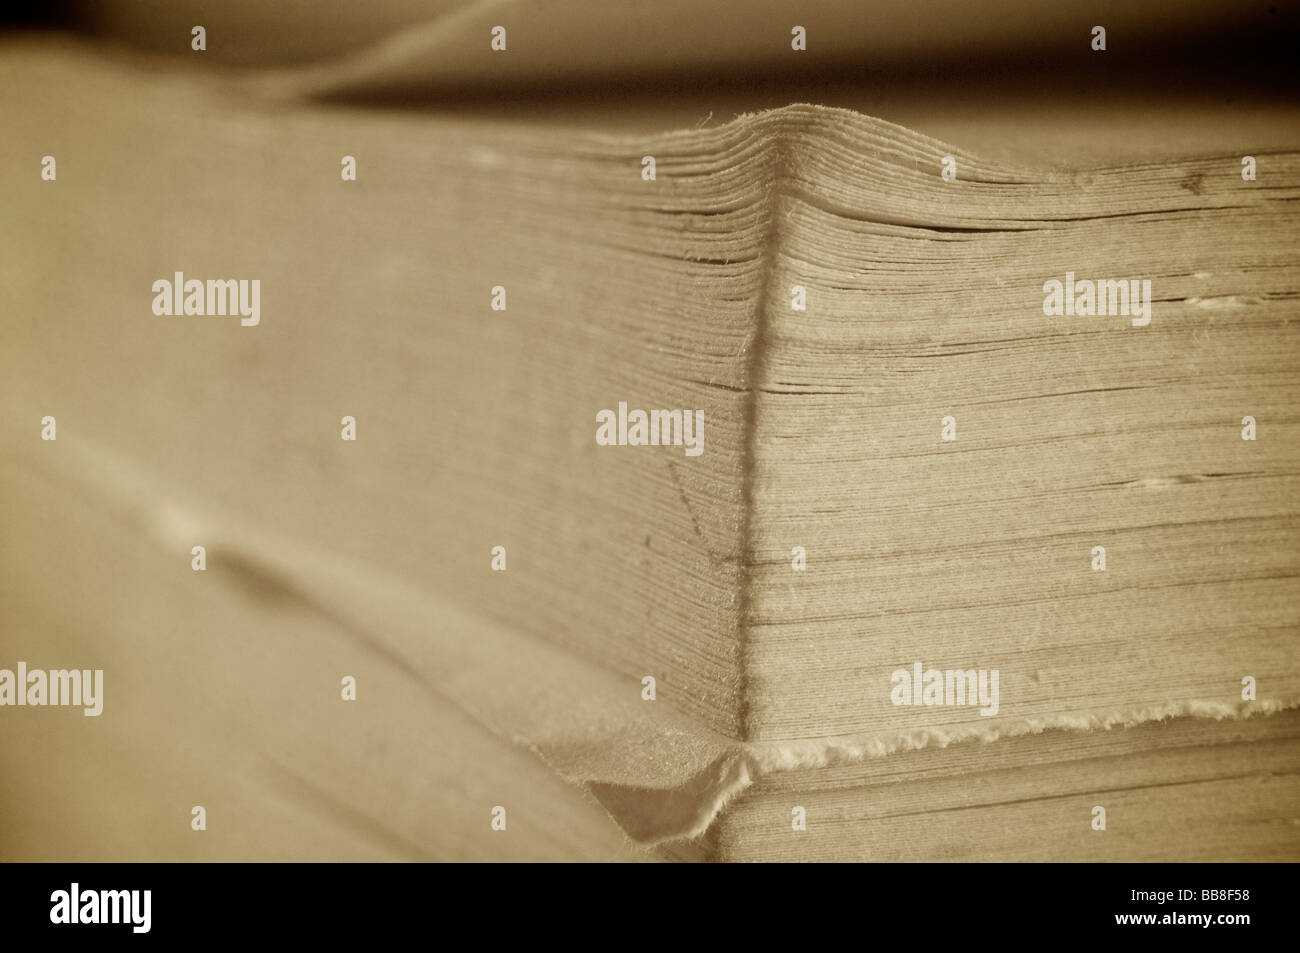 Corner of dog eared old paperback book Stock Photo - Alamy